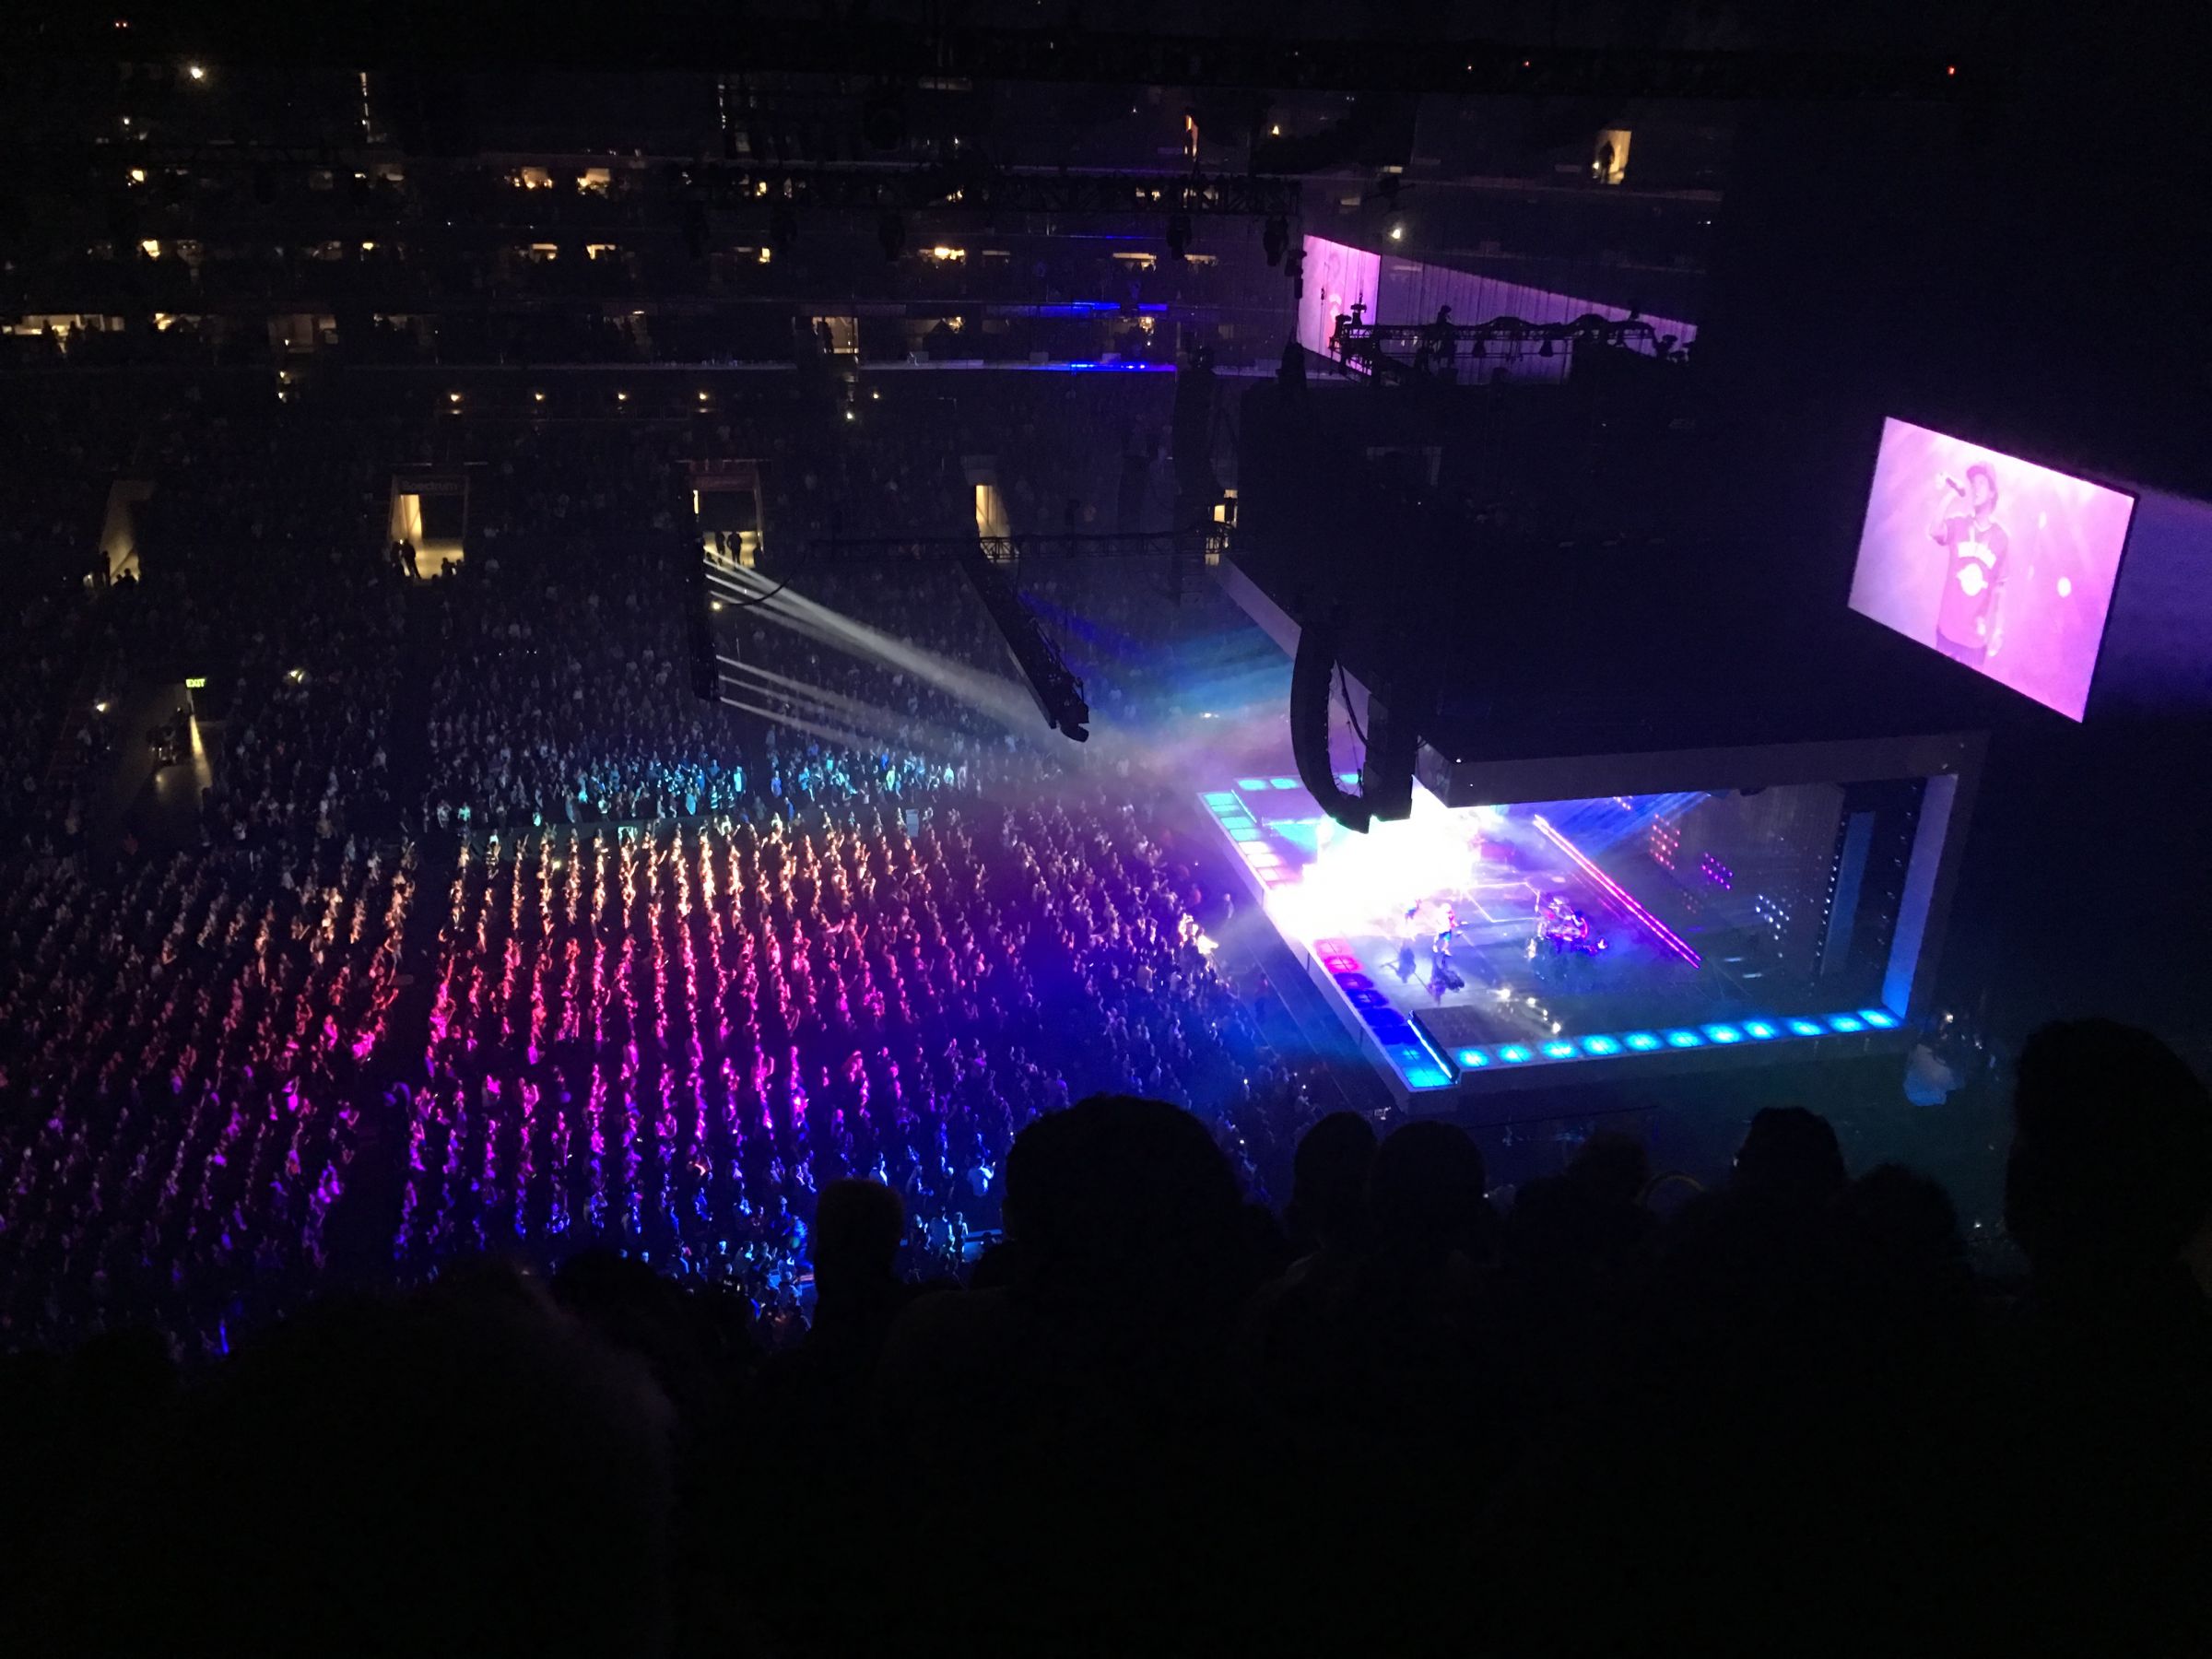 section 301, row 9 seat view  for concert - crypto.com arena